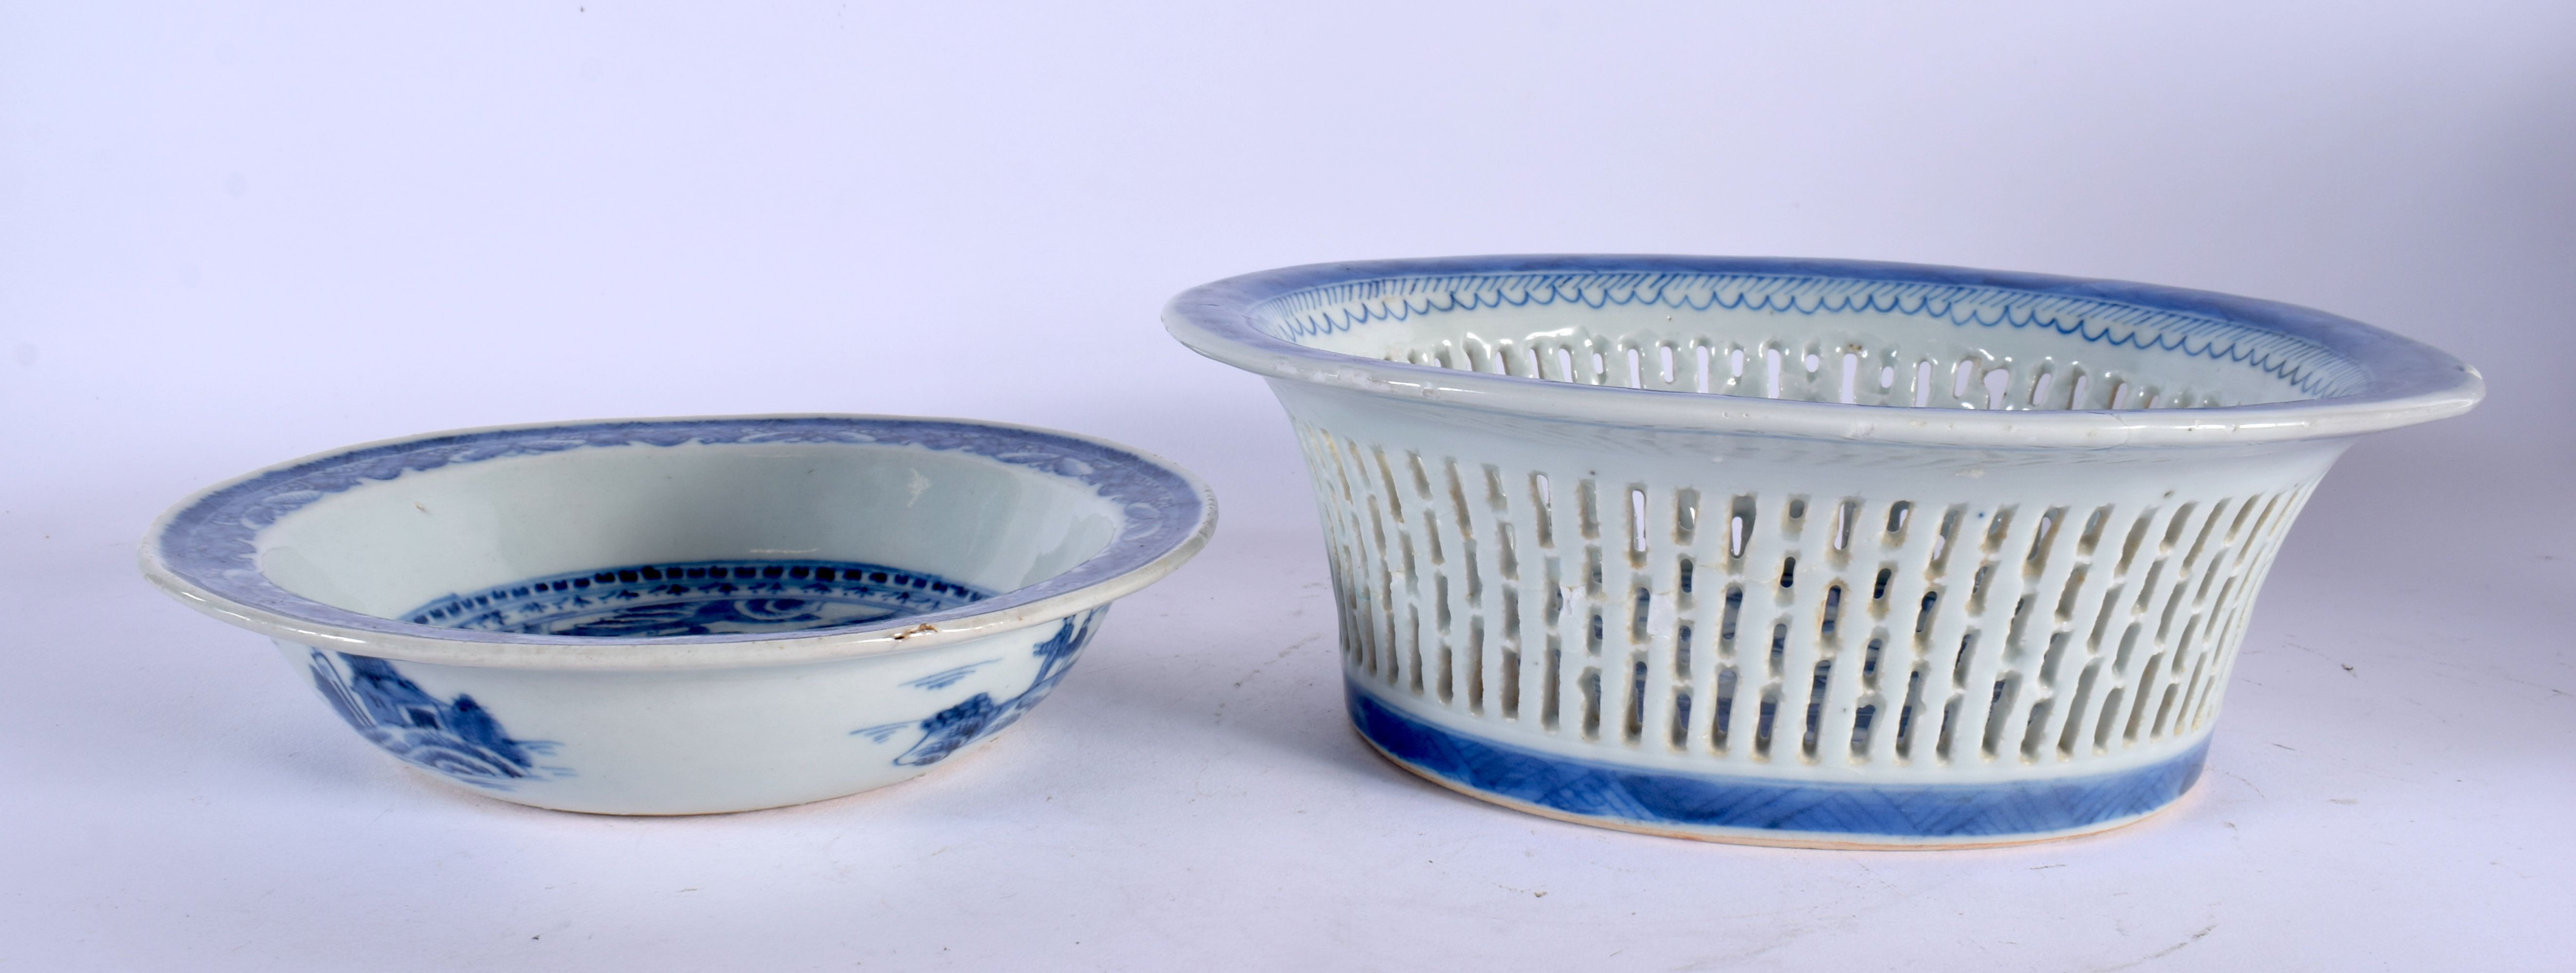 A LARGE 18TH CENTURY CHINESE EXPORT BLUE AND WHITE PORCELAIN DISH together with a basket & pudding b - Image 2 of 6